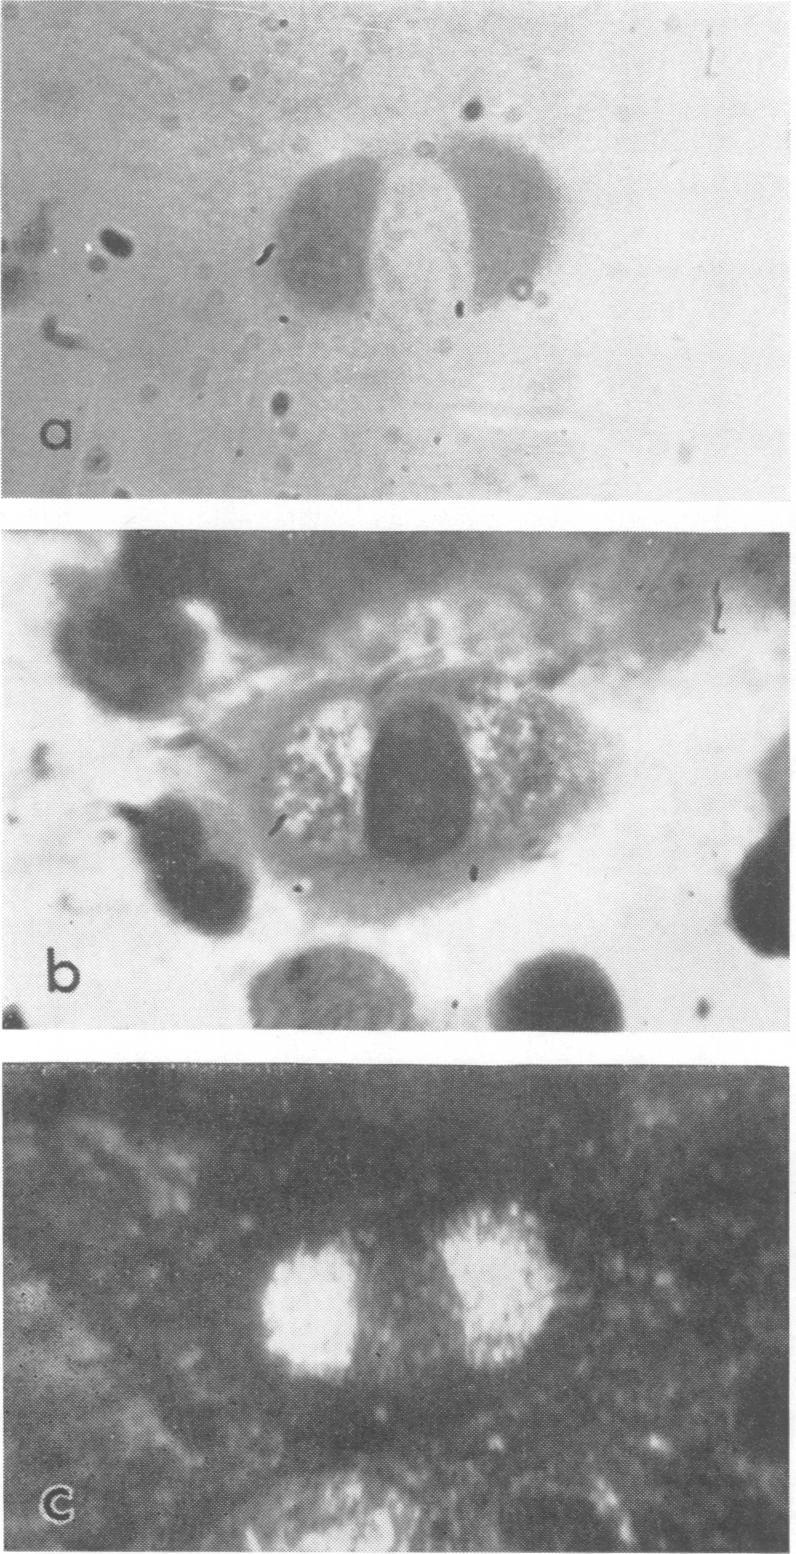 6e) fills the cytoplsm nd fluorescence of the virus prticles within the inclusion body (Figs 7c nd 8b). ruptures, liberting free elementry bodies (Fig. 6f) to repet the cycle in other cells.